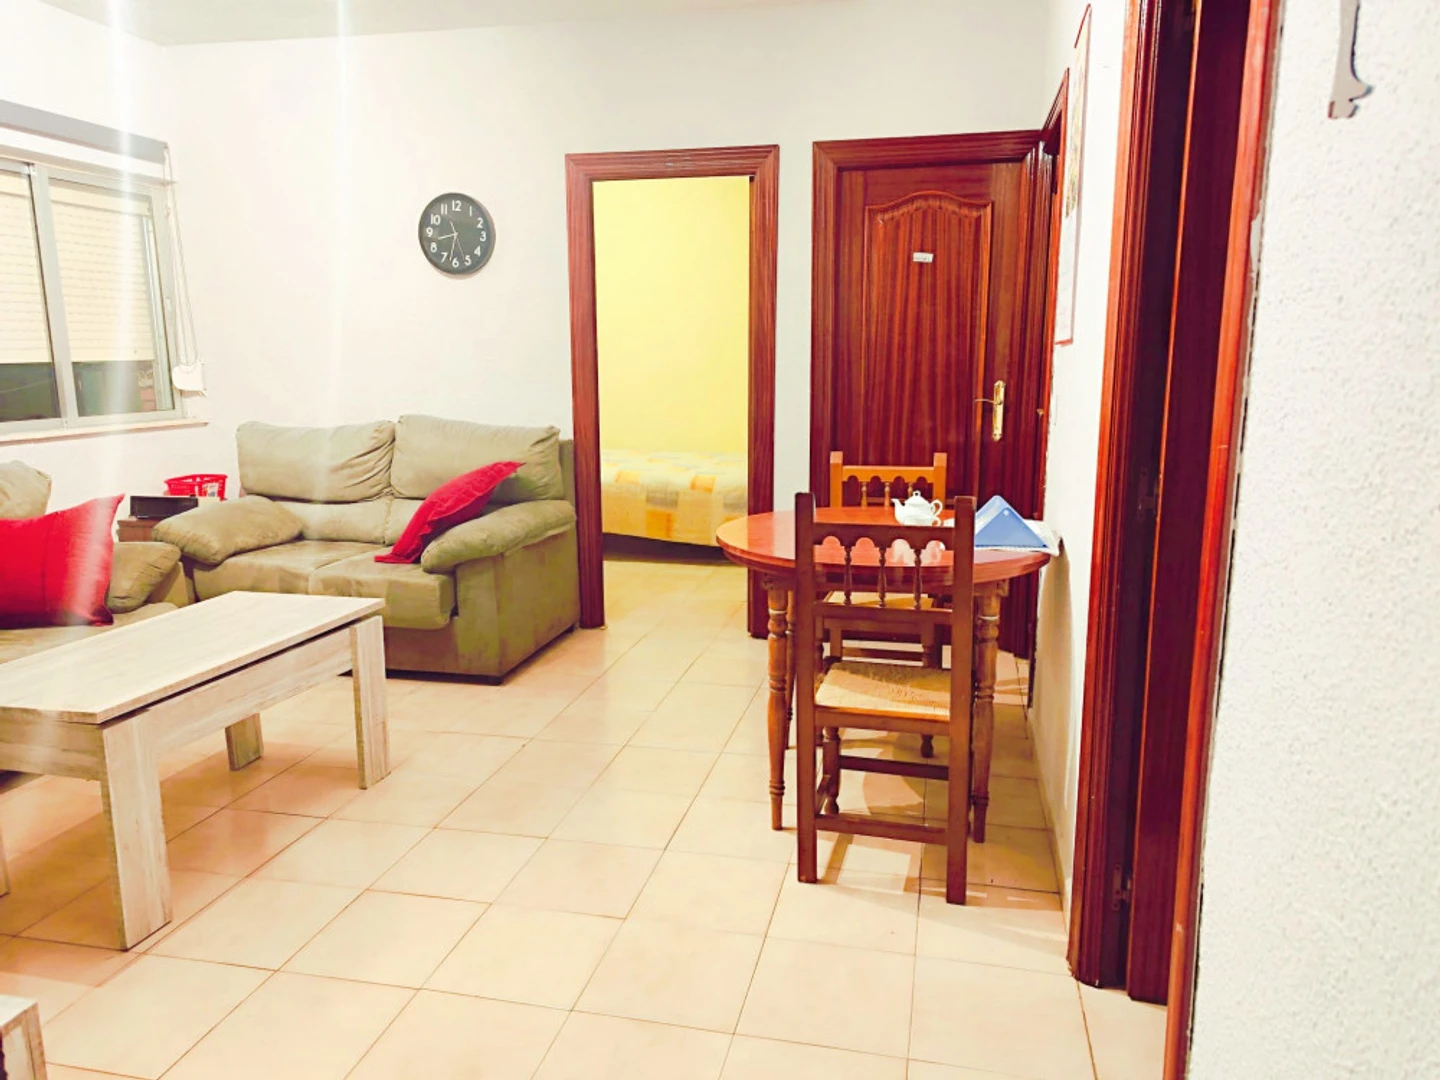 Accommodation with 3 bedrooms in salamanca